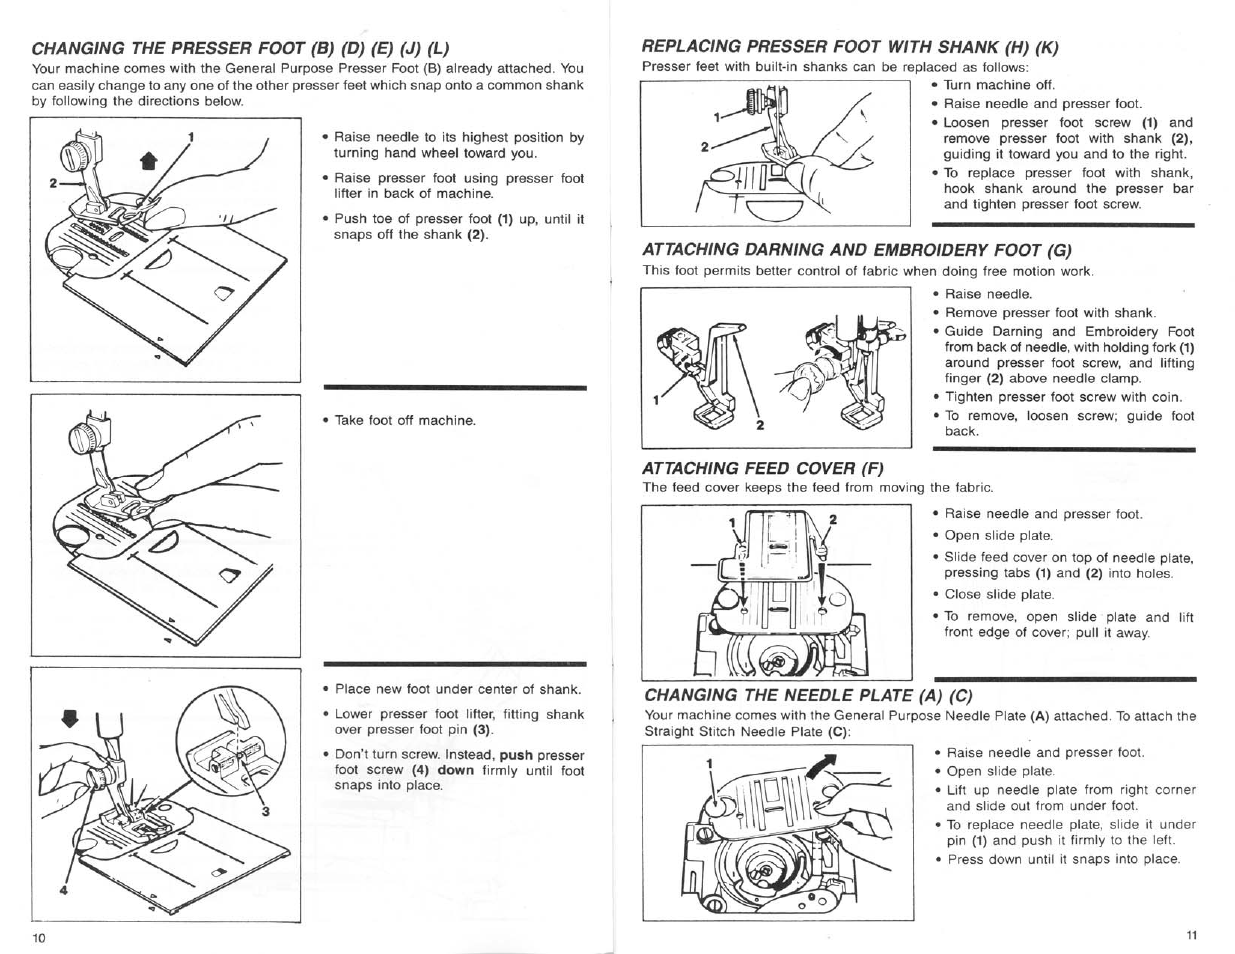 Replacing presser foot with shank (h) (k), Attaching darning and embroidery foot (g), Attaching feed cover (f) | Changing the needle plate (a) (c), Replacing presser foot with shank, Attaching darning and embroidery foot, Attaching feed cover, Changing the needle plate | SINGER 9124 User Manual | Page 7 / 25